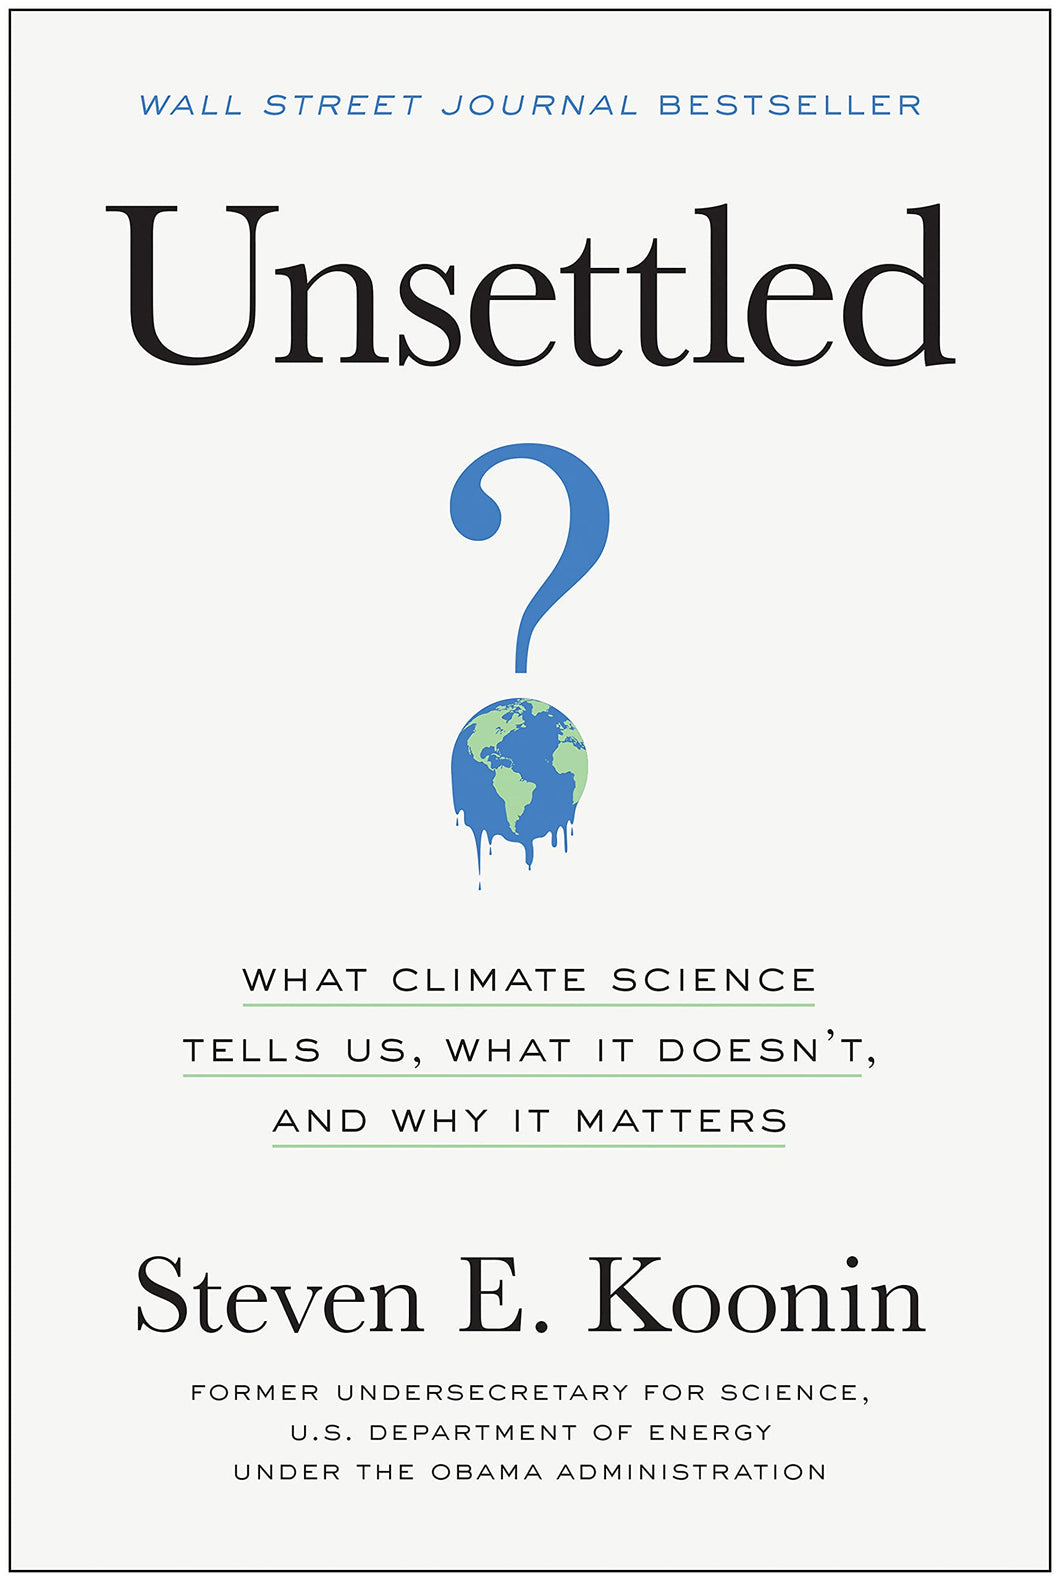 Unsettled: What Climate Science Tells Us, What It Doesn't, and Why It Matters [Steven E. Koonin]